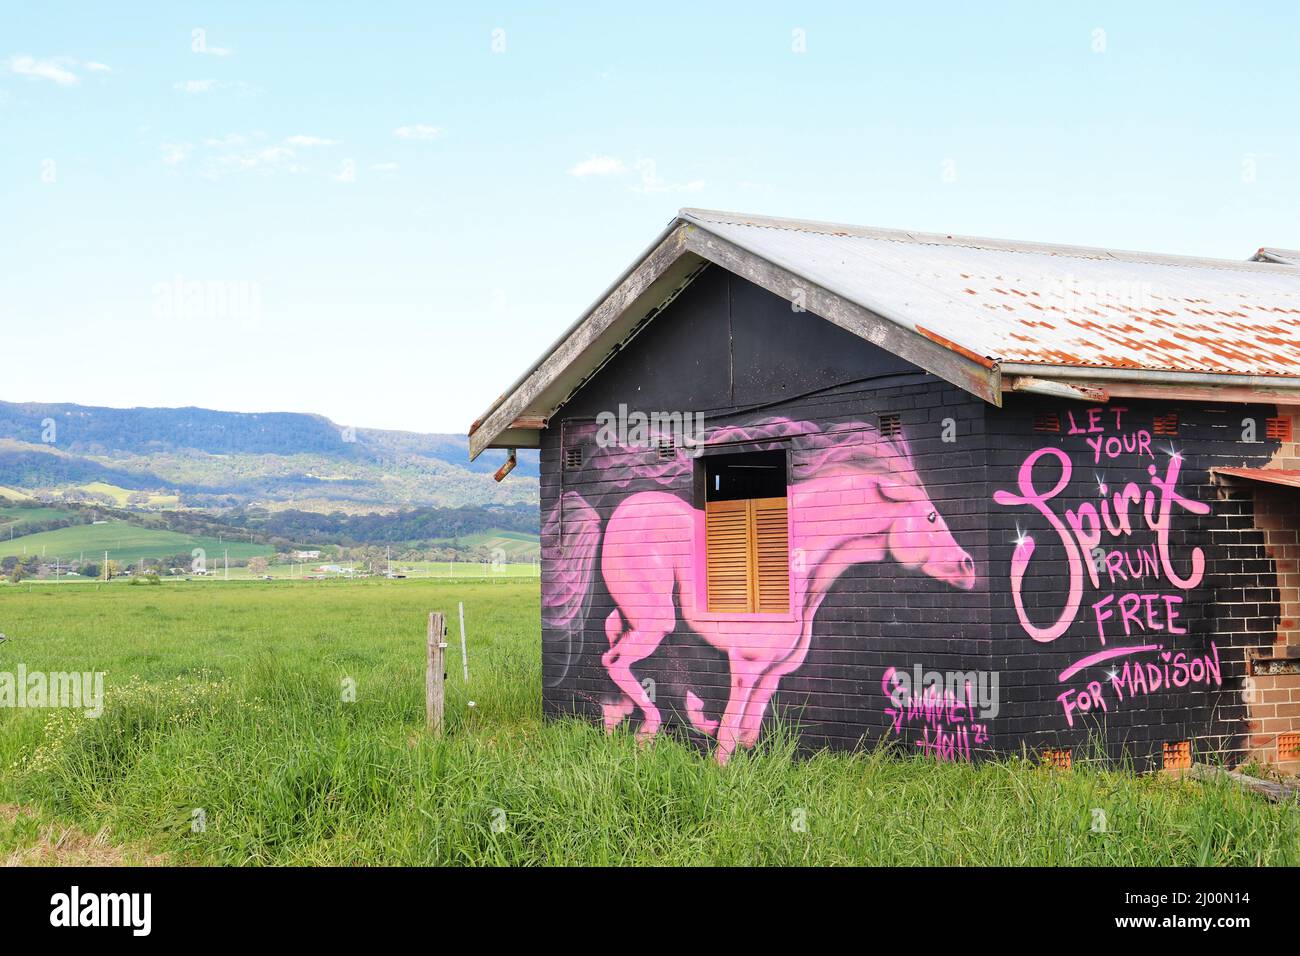 'Let your spirit run free for Madison' wall painting in an old house in Jamberoo, Australia Stock Photo